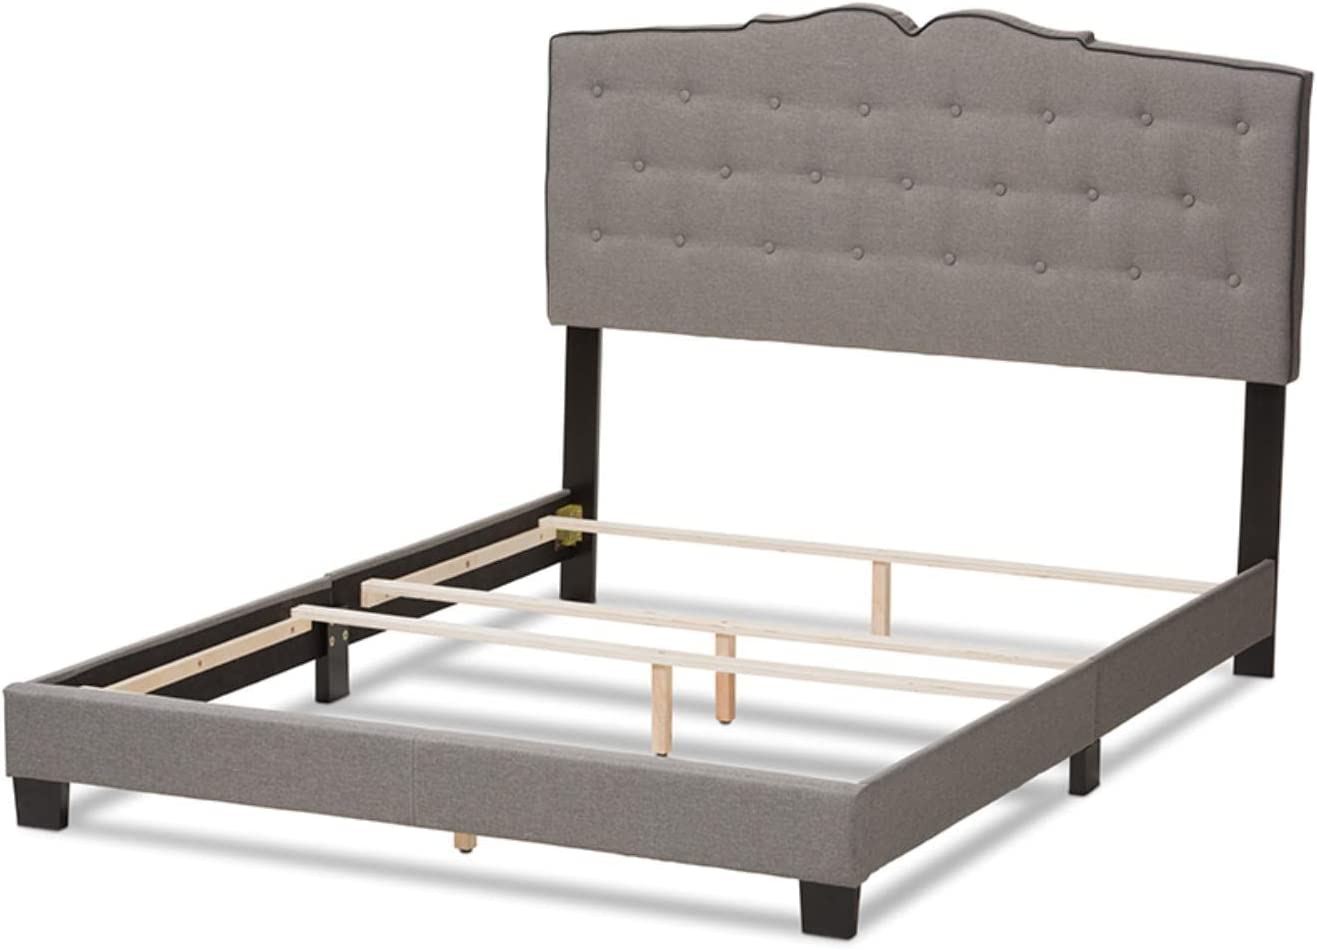 Baxton Studio Vivienne Modern and Contemporary Light Grey Fabric Upholstered King Size Bed